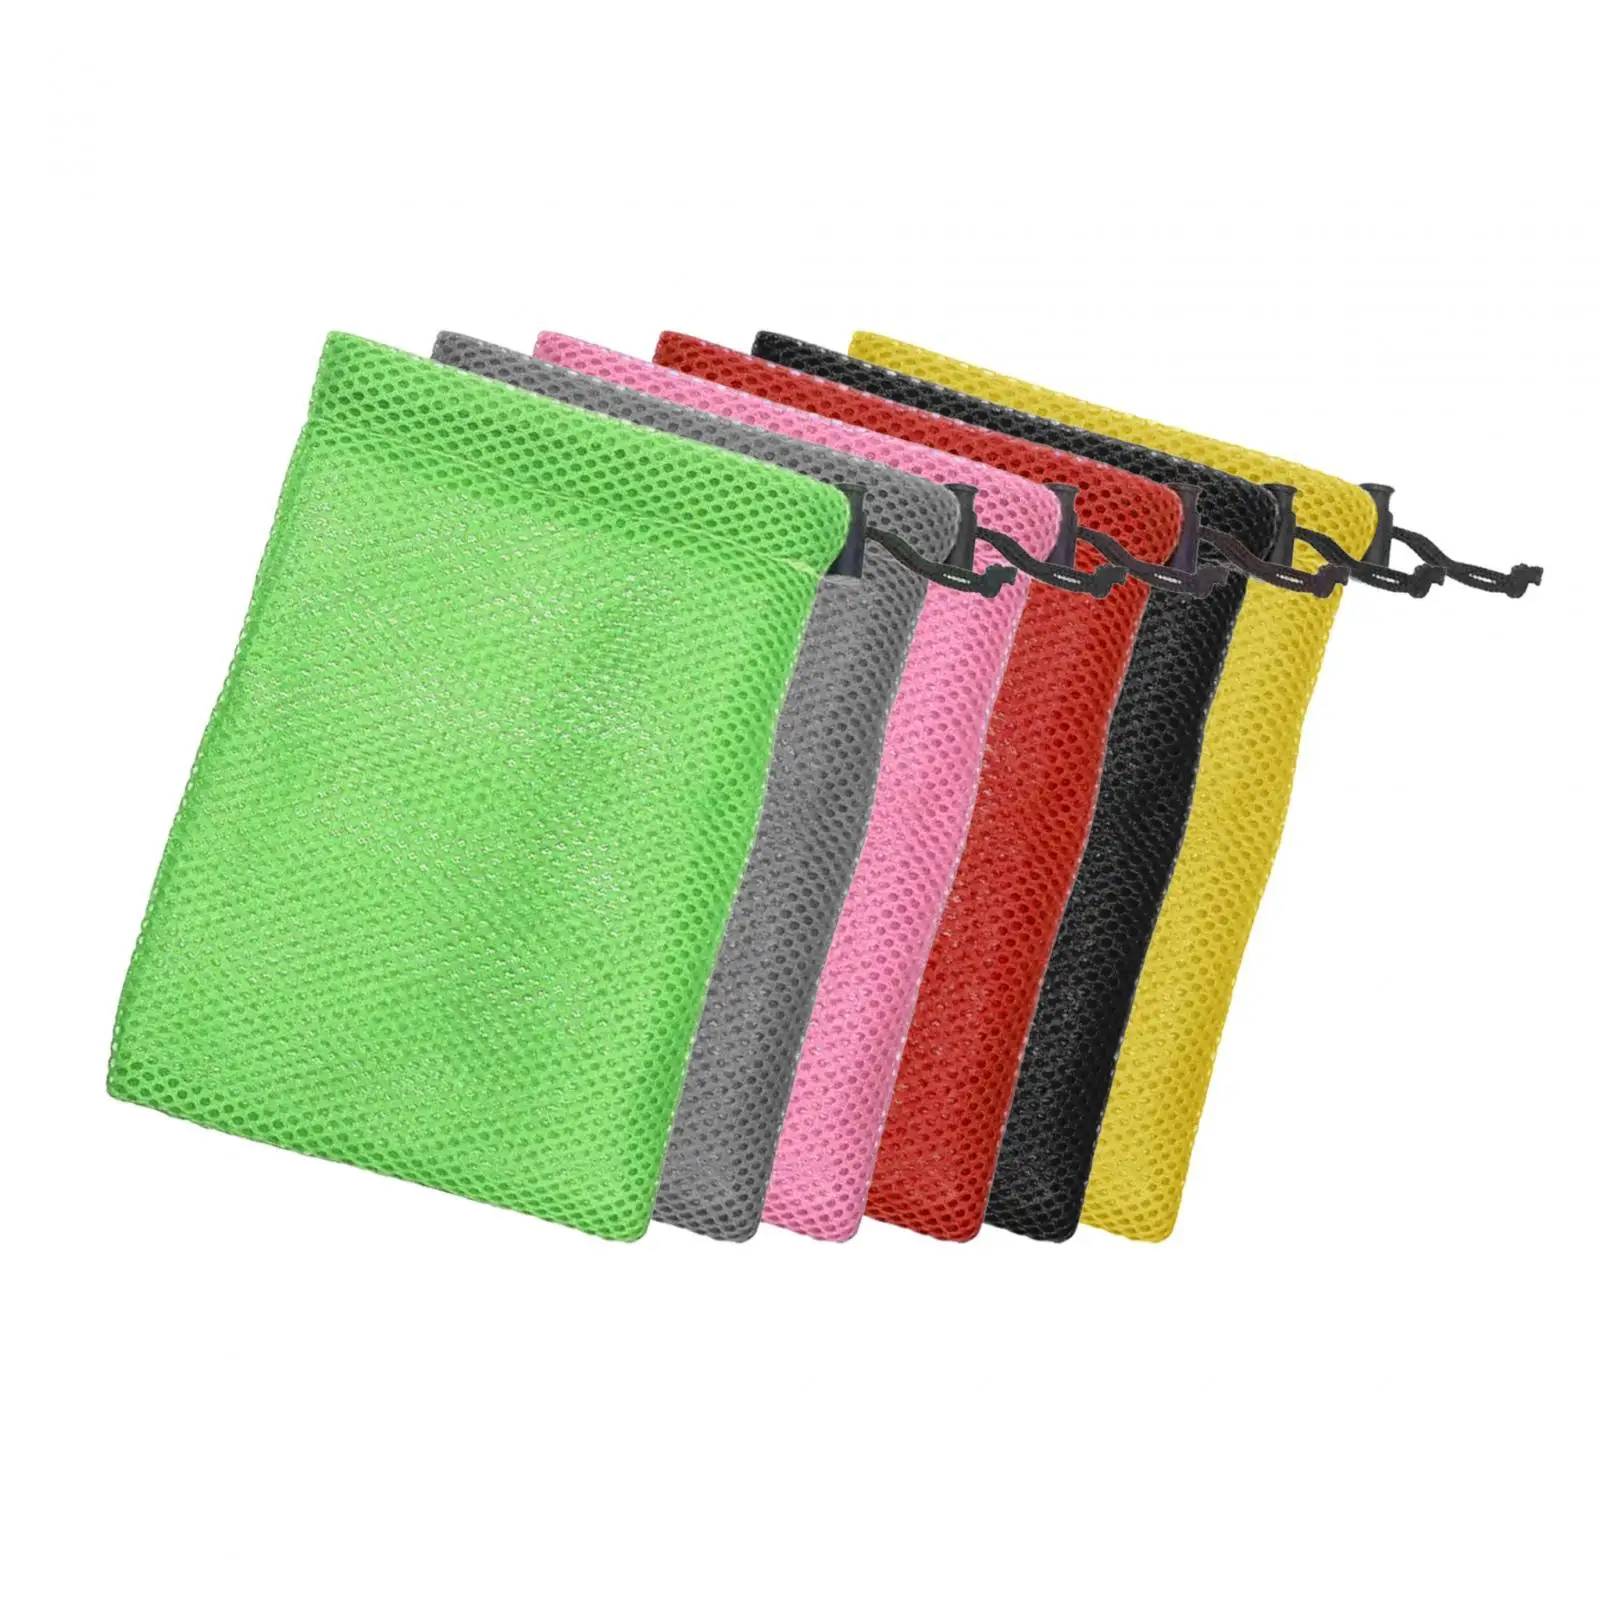 Multifunctional Mesh Small Drawstring Storage Bag for Cosmetics, Toy Collection,